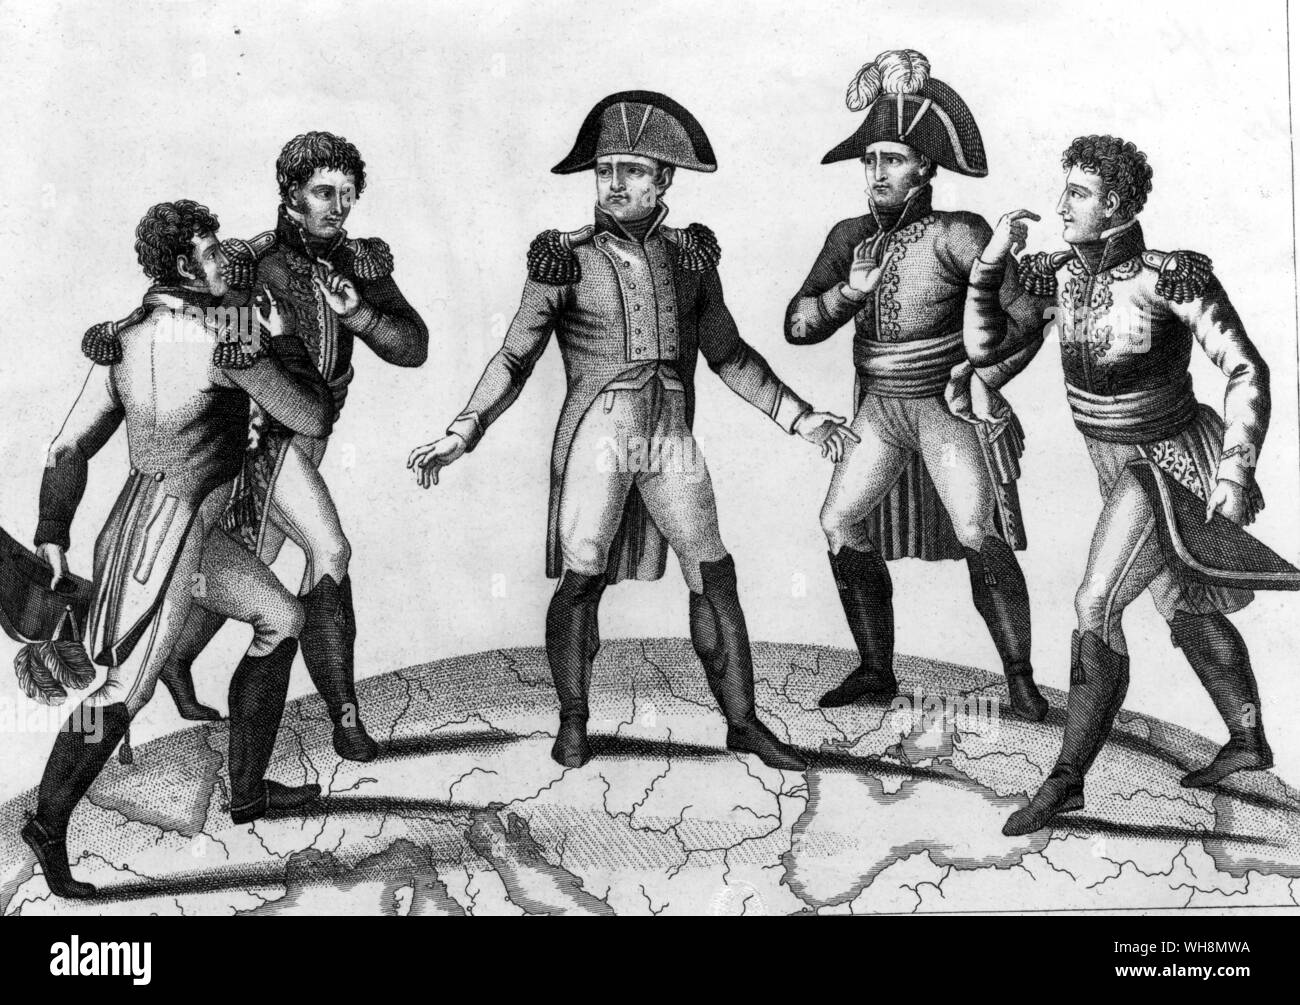 ... a Mediterranean clan connection, a cosa nostra ...': Bonaparte and his brothers. Right to left: Joseph, King of Spain. Louis, King of Holland. Bonaparte: Lucien, Prince of Canino. and Jerome, King of Westphalia. Bibliotheque Nationale, Paris. Stock Photo